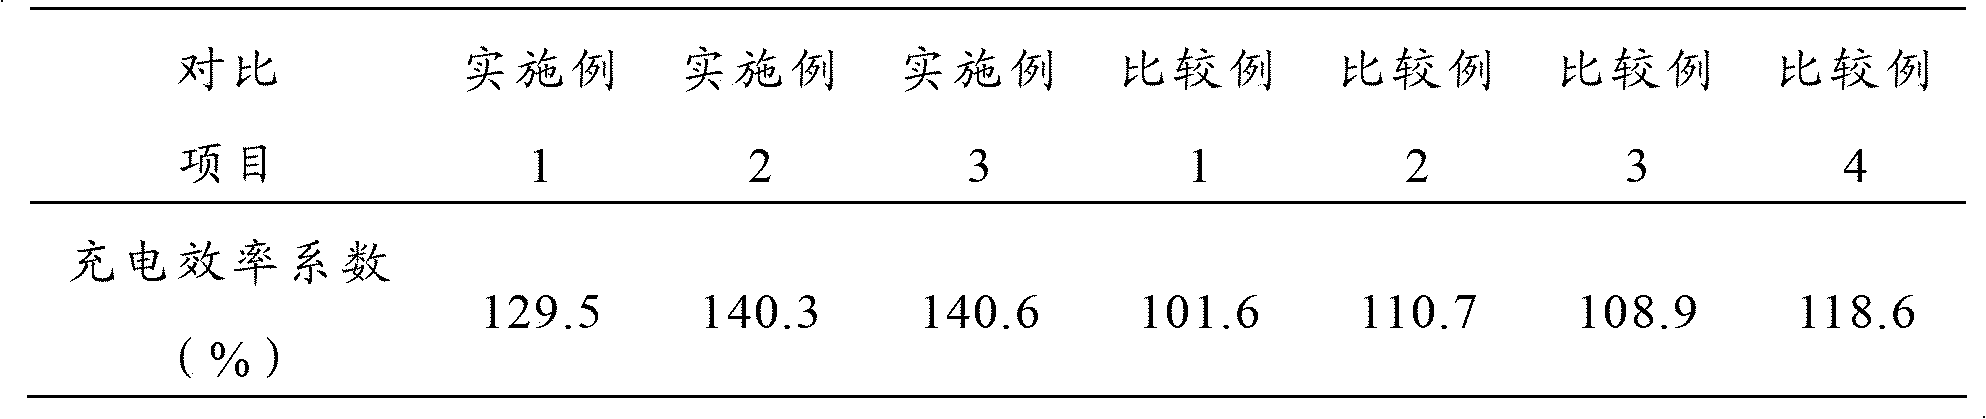 Lead plaster composition for manufacturing positive plate of lead-acid storage battery, positive plate of lead-acid storage battery and lead-acid storage battery